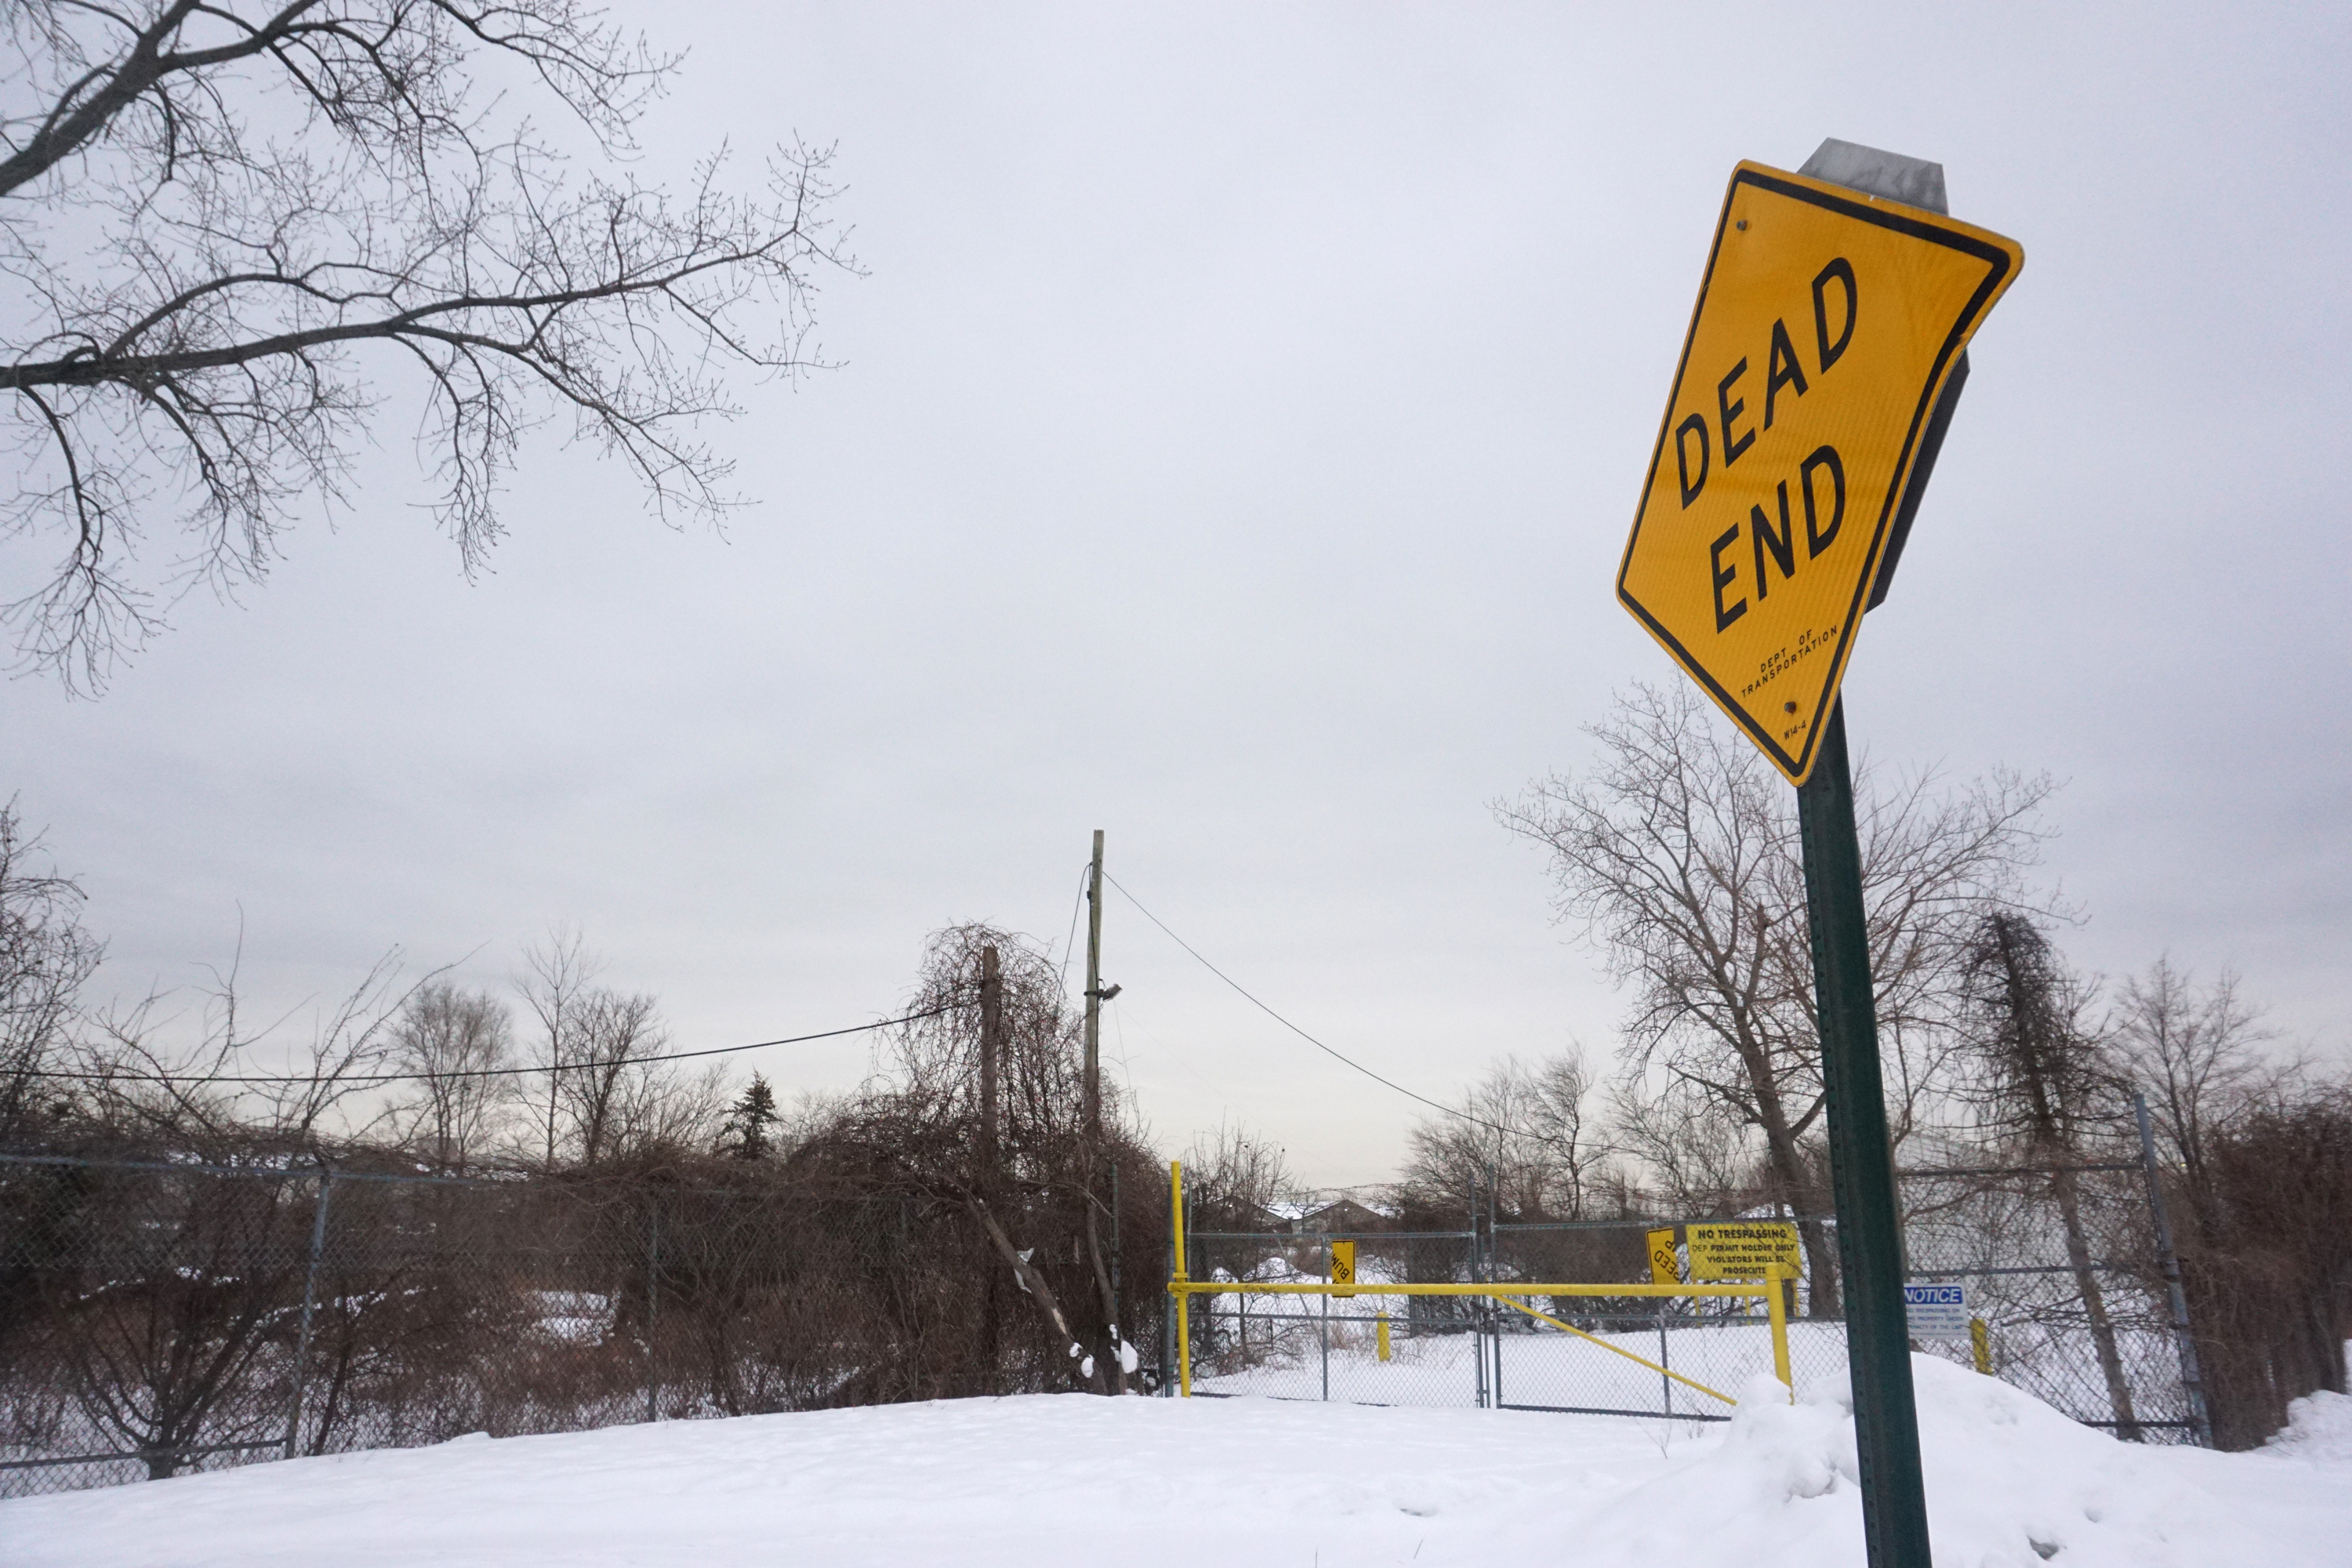 The U.S. Army Corps of Engineers plans to build a floodwall around the Oakwood Wastewater Treatment Plant, but the area requires a cleanup of radiation that came from nearby Great Kills Park, Feb. 12, 2021.